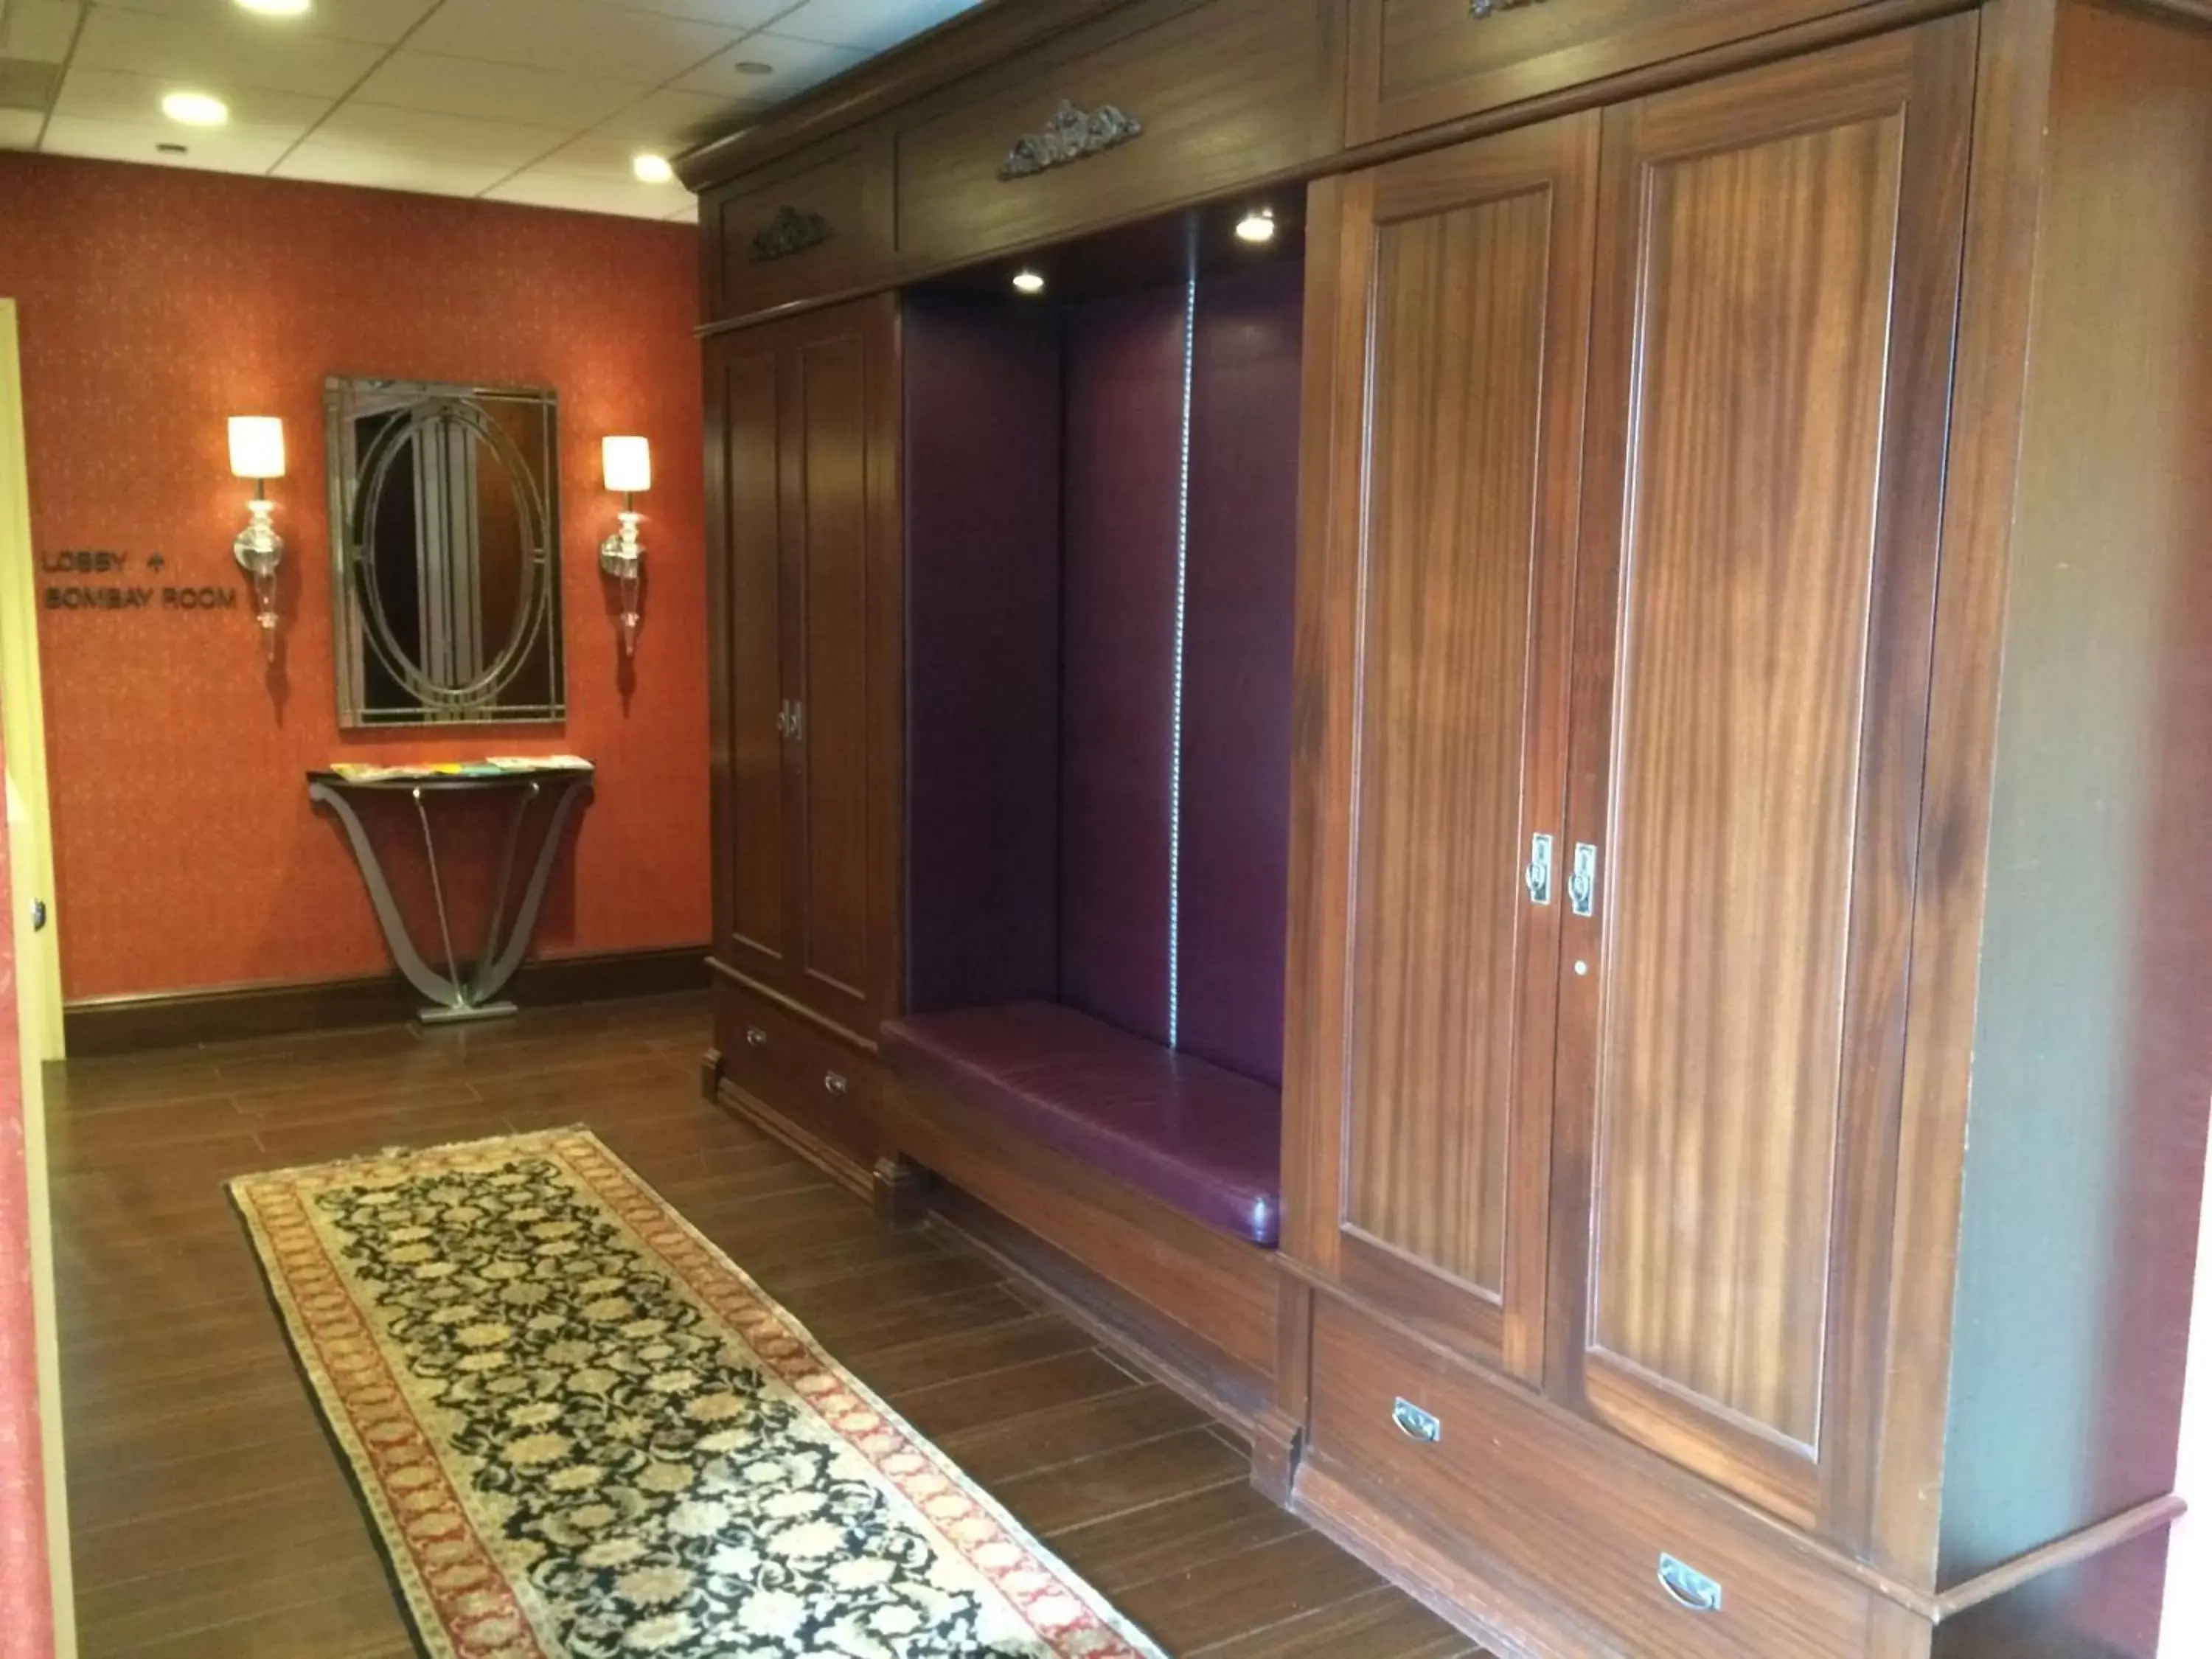 Property building, TV/Entertainment Center in Chestnut Hill Hotel